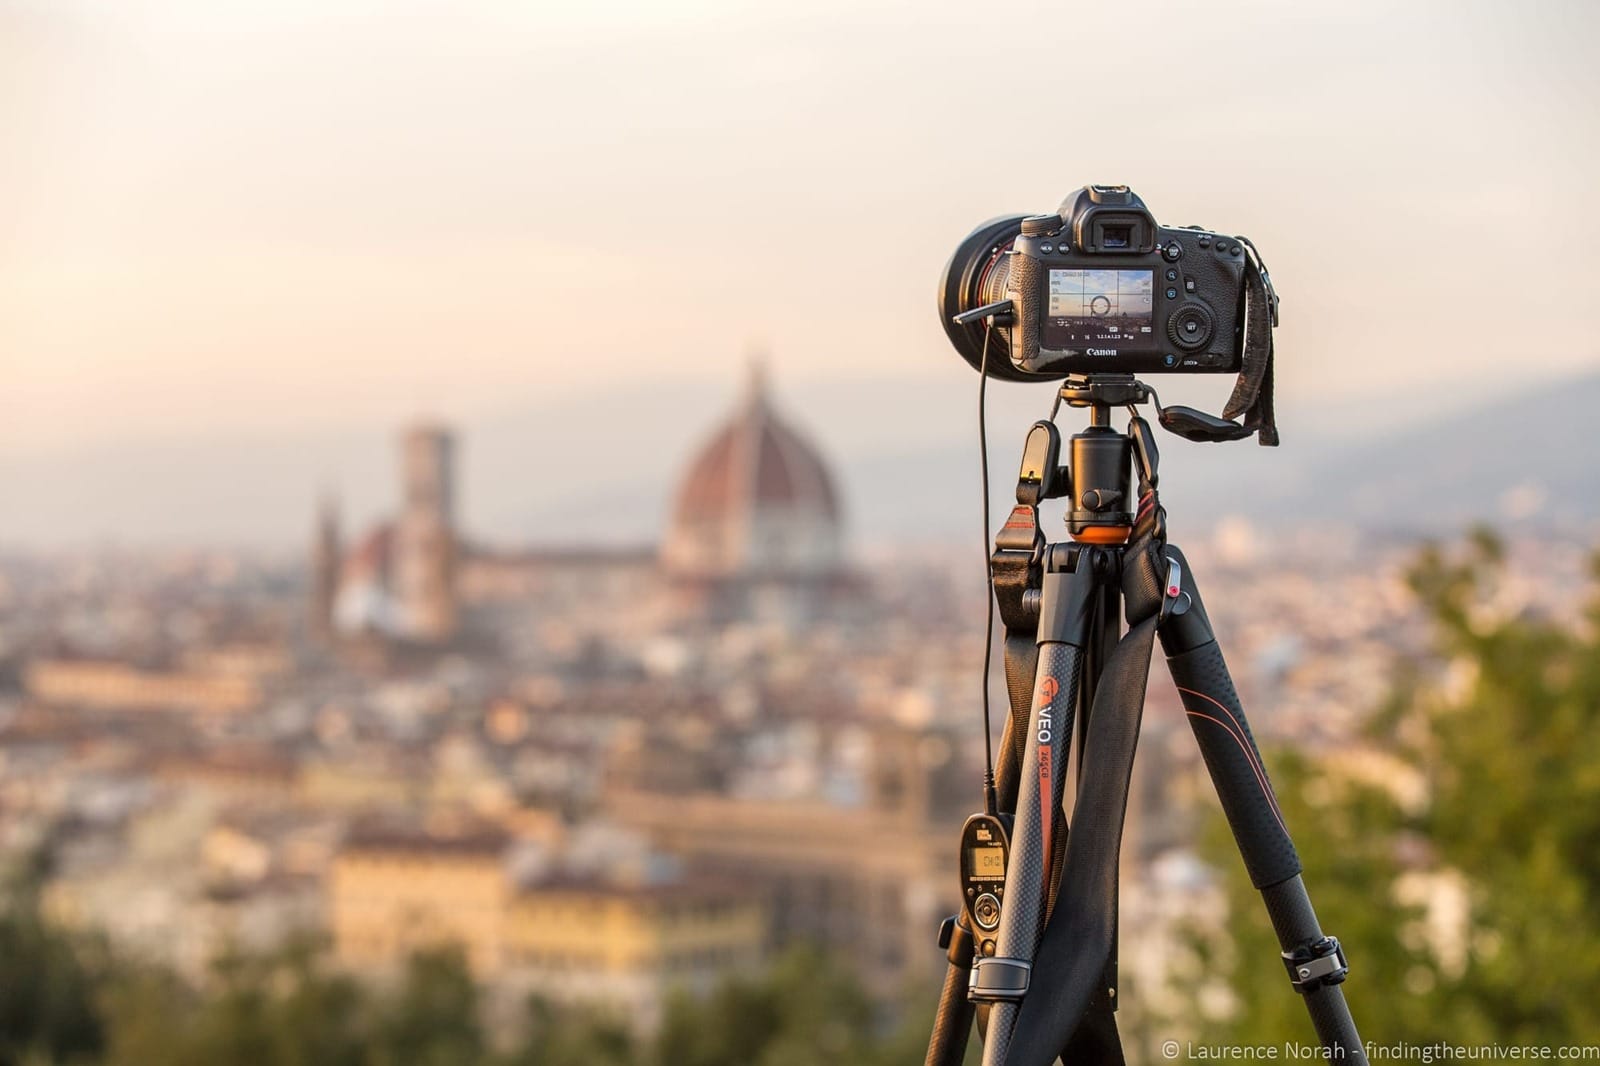 [Reasons%2520you%2520need%2520a%2520tripod%2520for%2520photography%2520-Florence%25201_by_Laurence%2520Norah%255B3%255D.jpg]